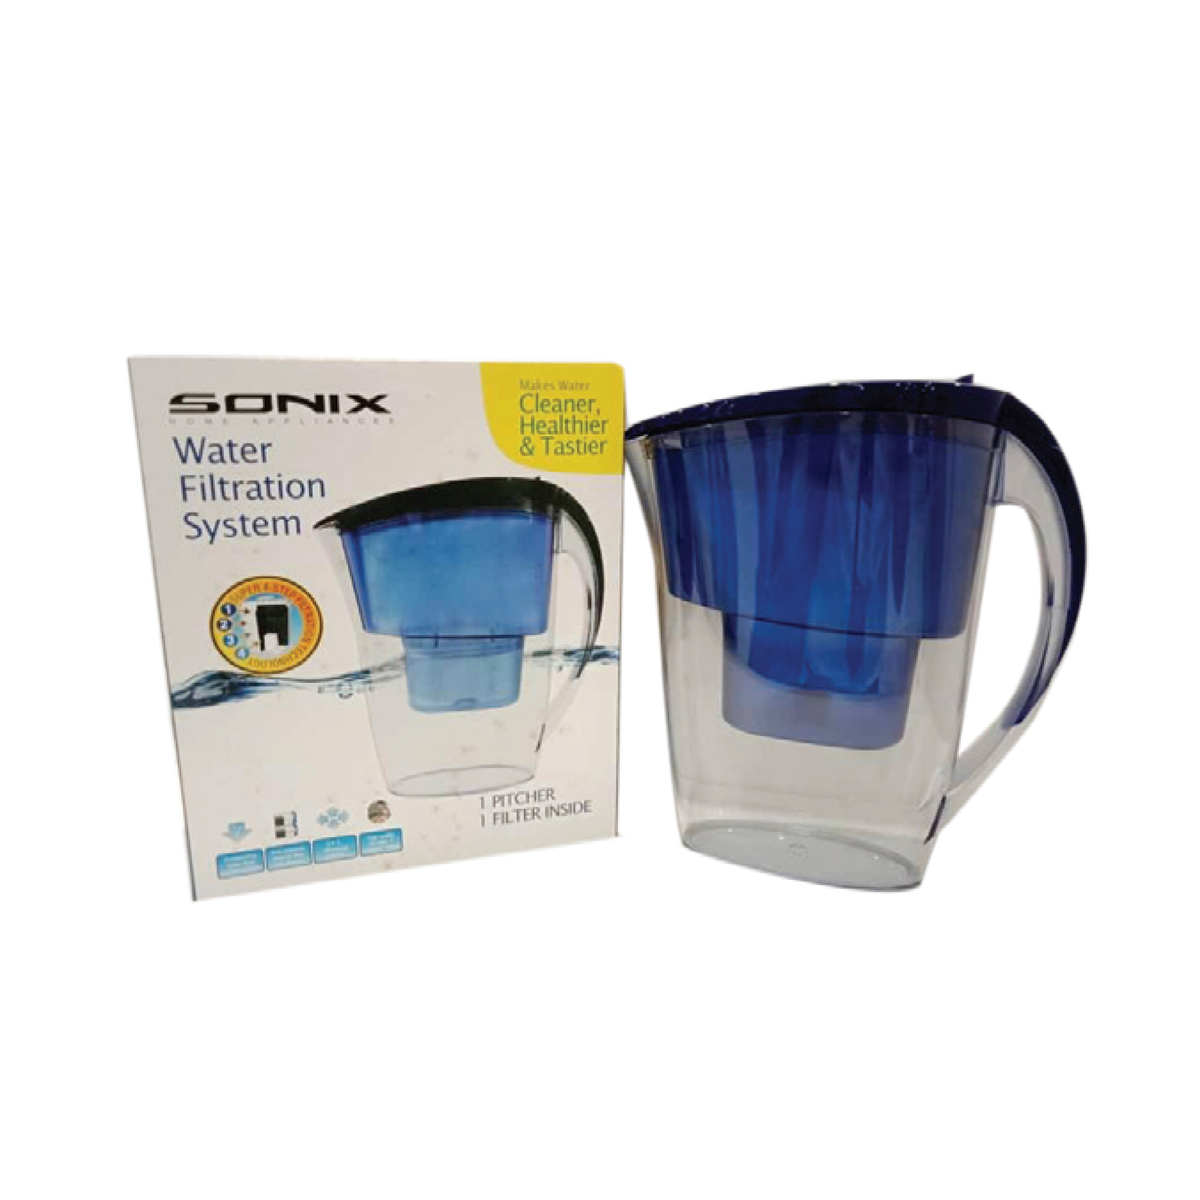 Sonix Water Filtration System HS523